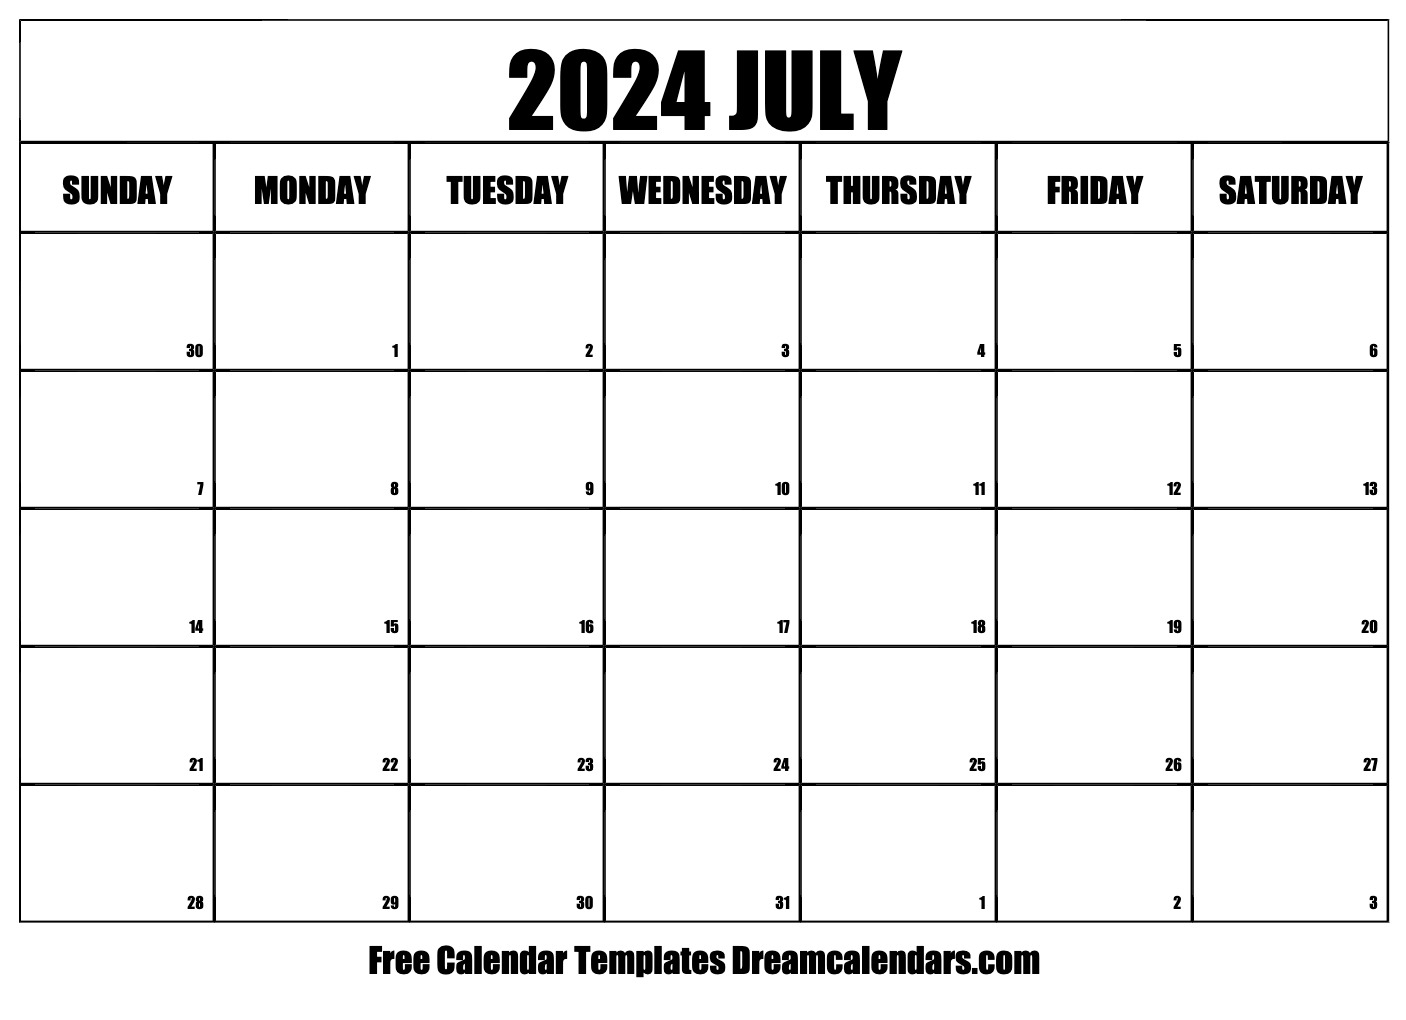 July 2024 Calendar | Free Blank Printable With Holidays for July 2024 Free Printable Calendar